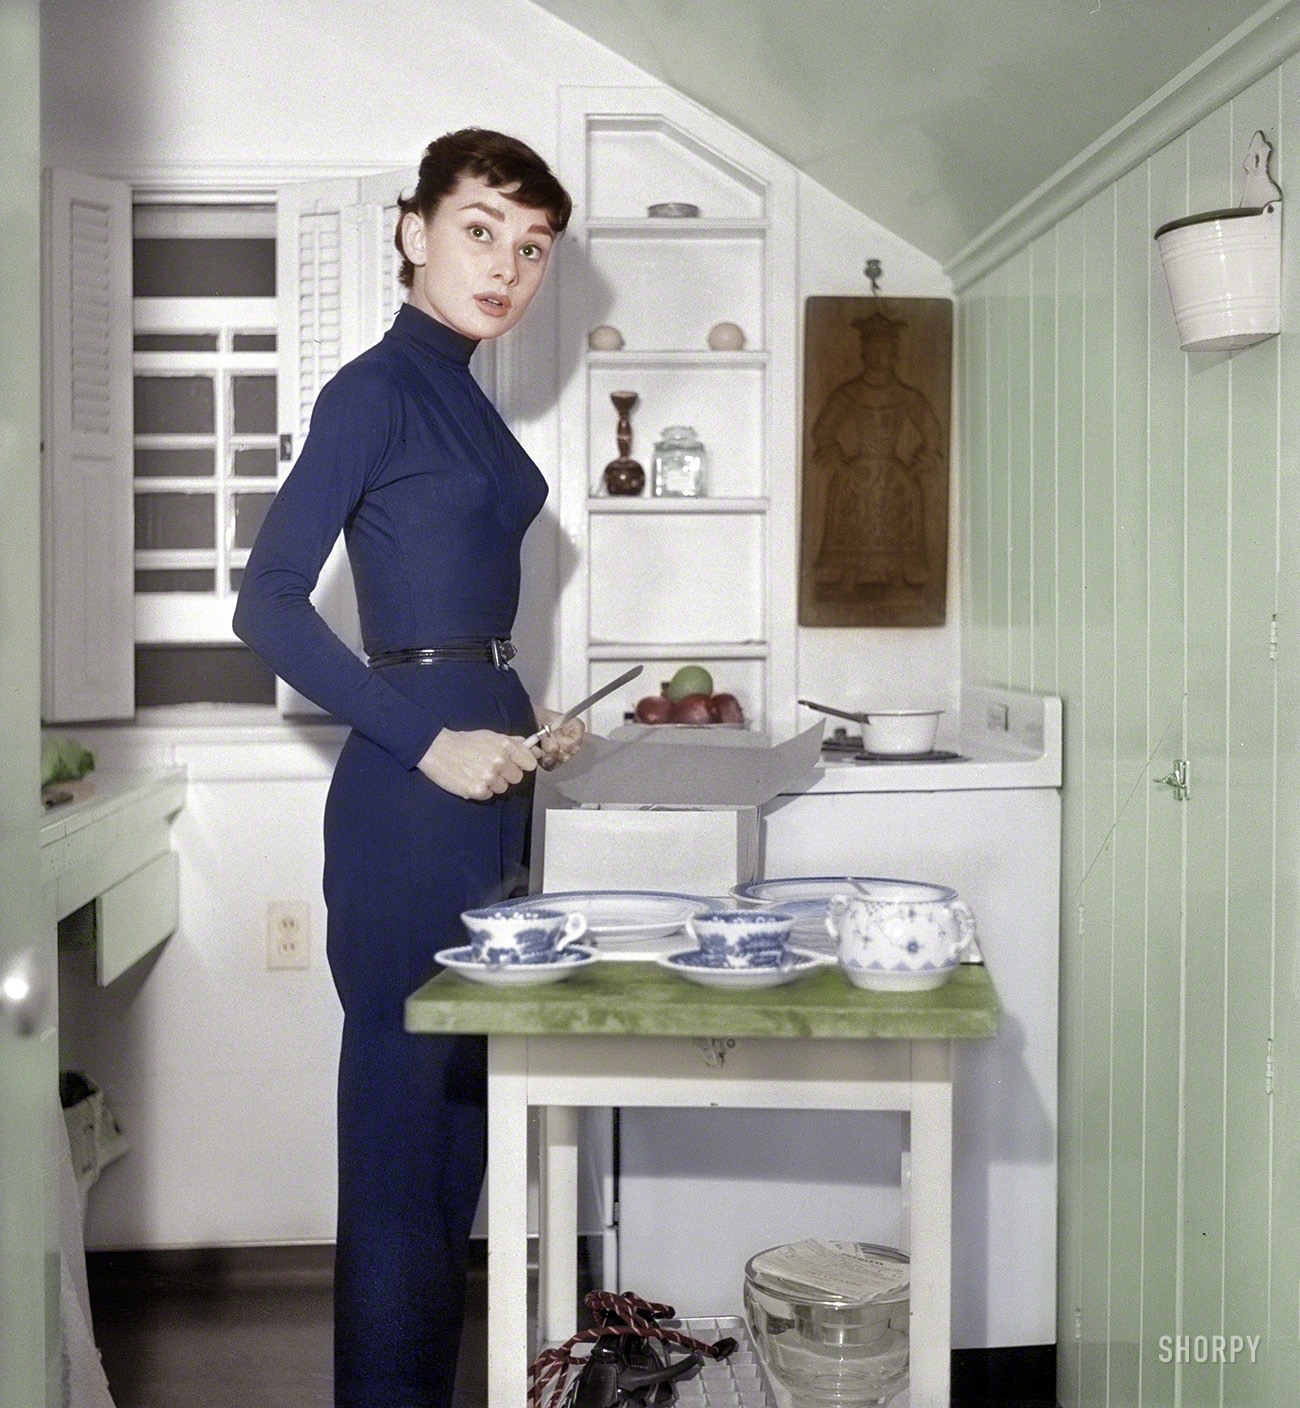 Colorized from this Shorpy original. Why yes, we'd love some! View full size.